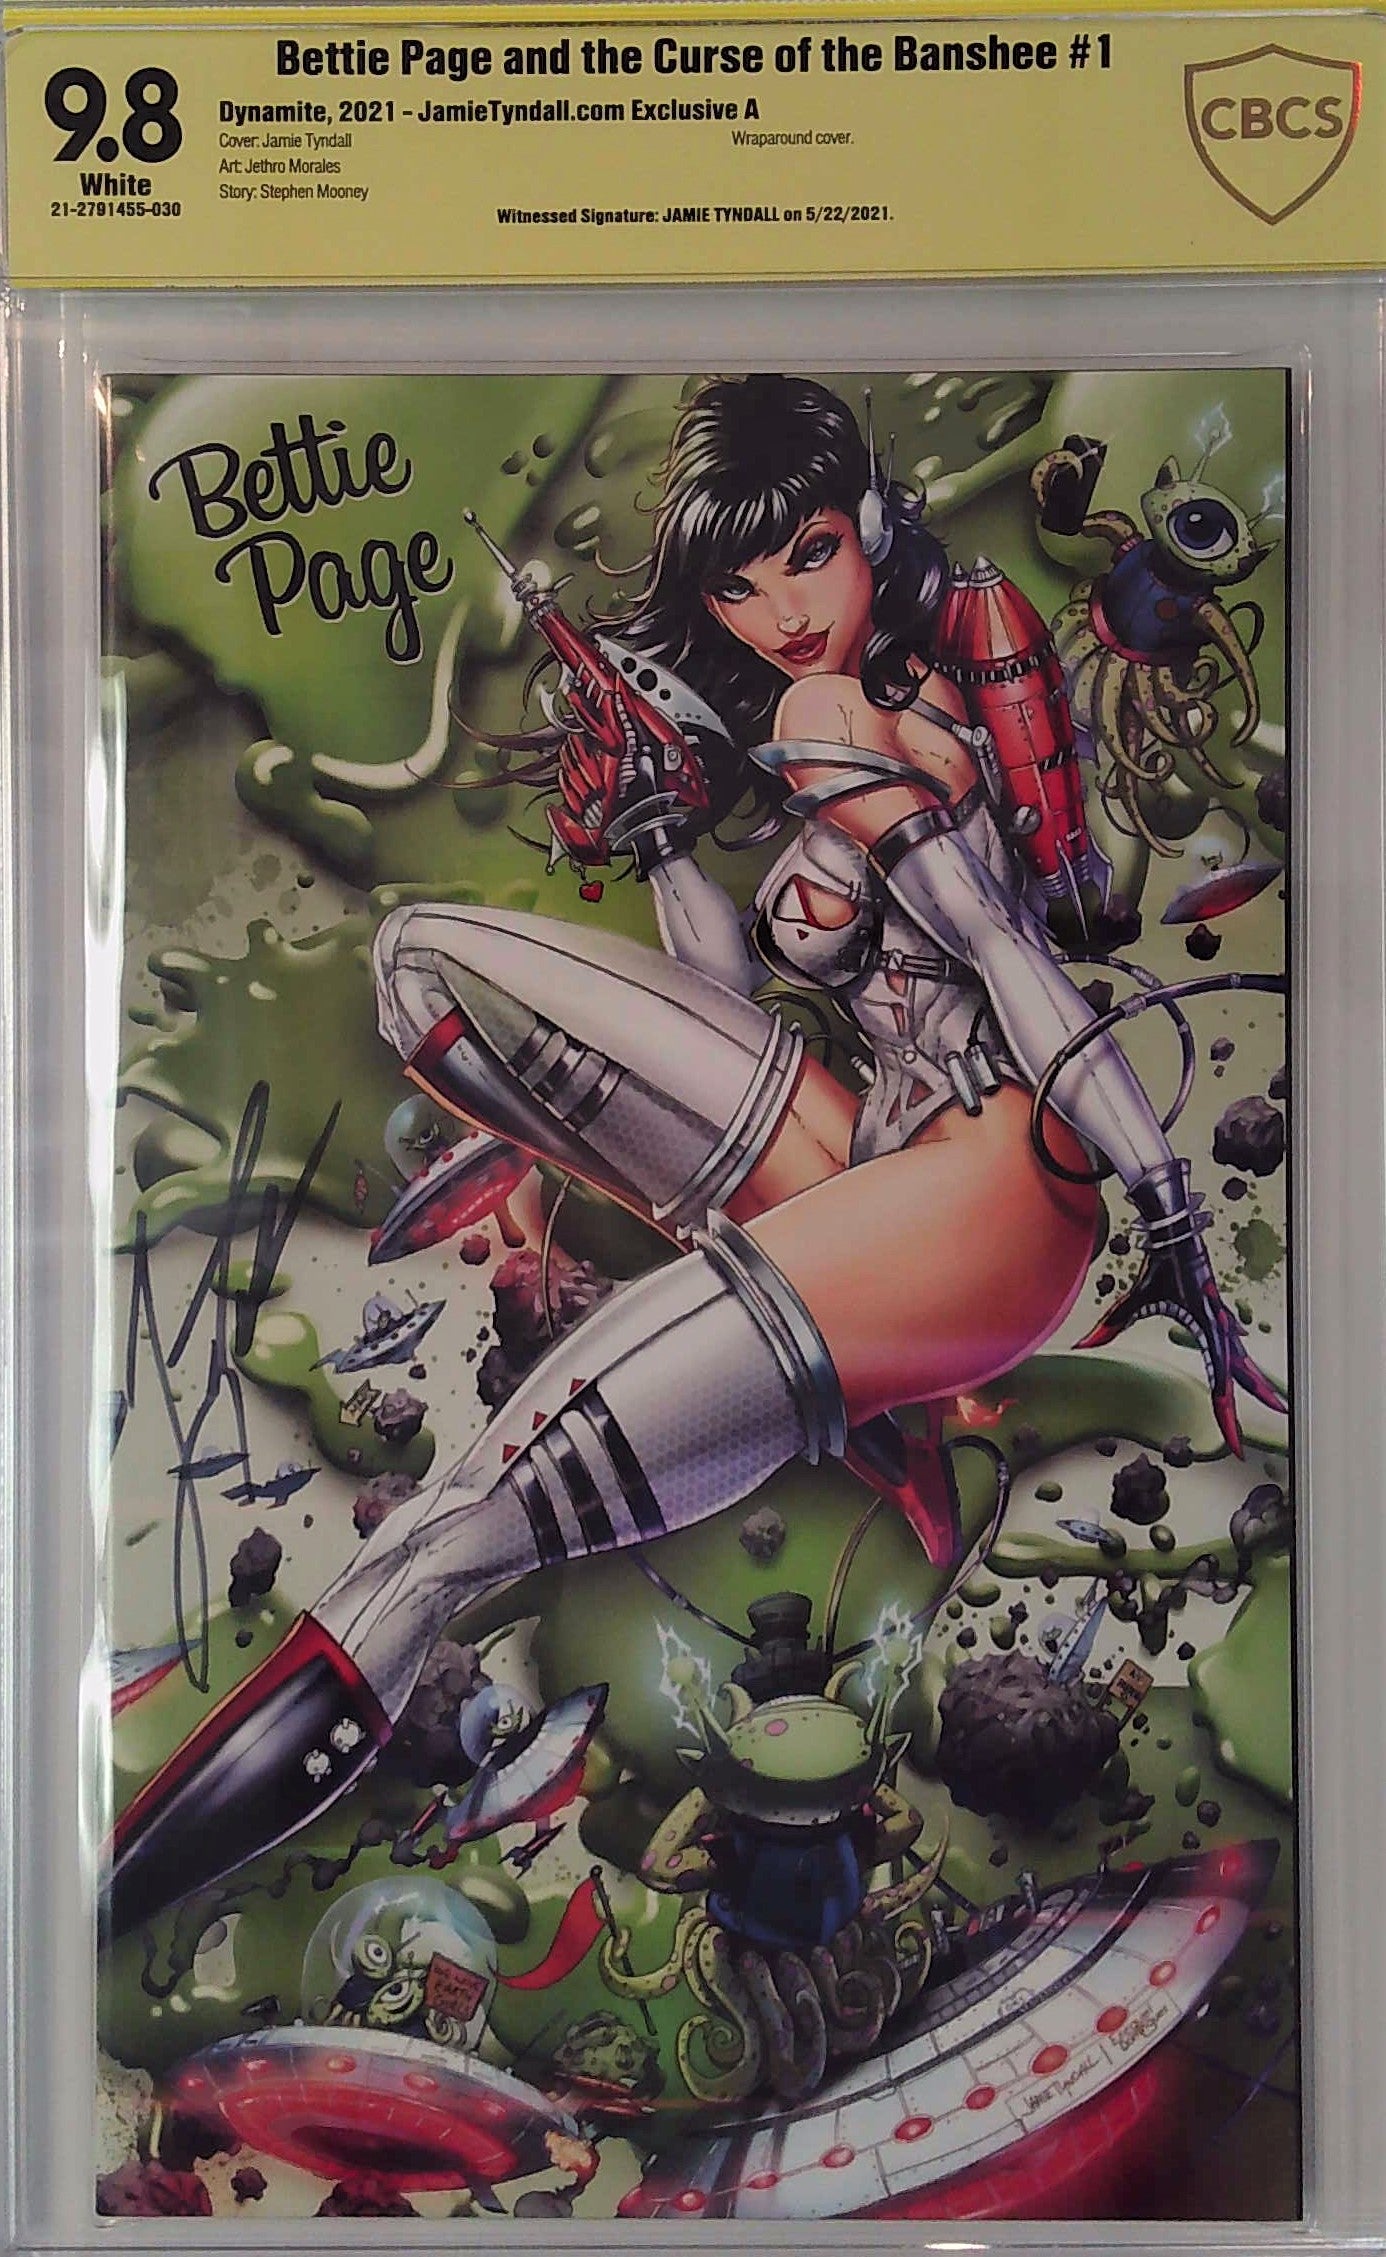 Bettie Page and the Curse of the Banshee #1 JamieTyndall.com Exclusive A CBCS 9.8 Yellow Label Wraparound Cover